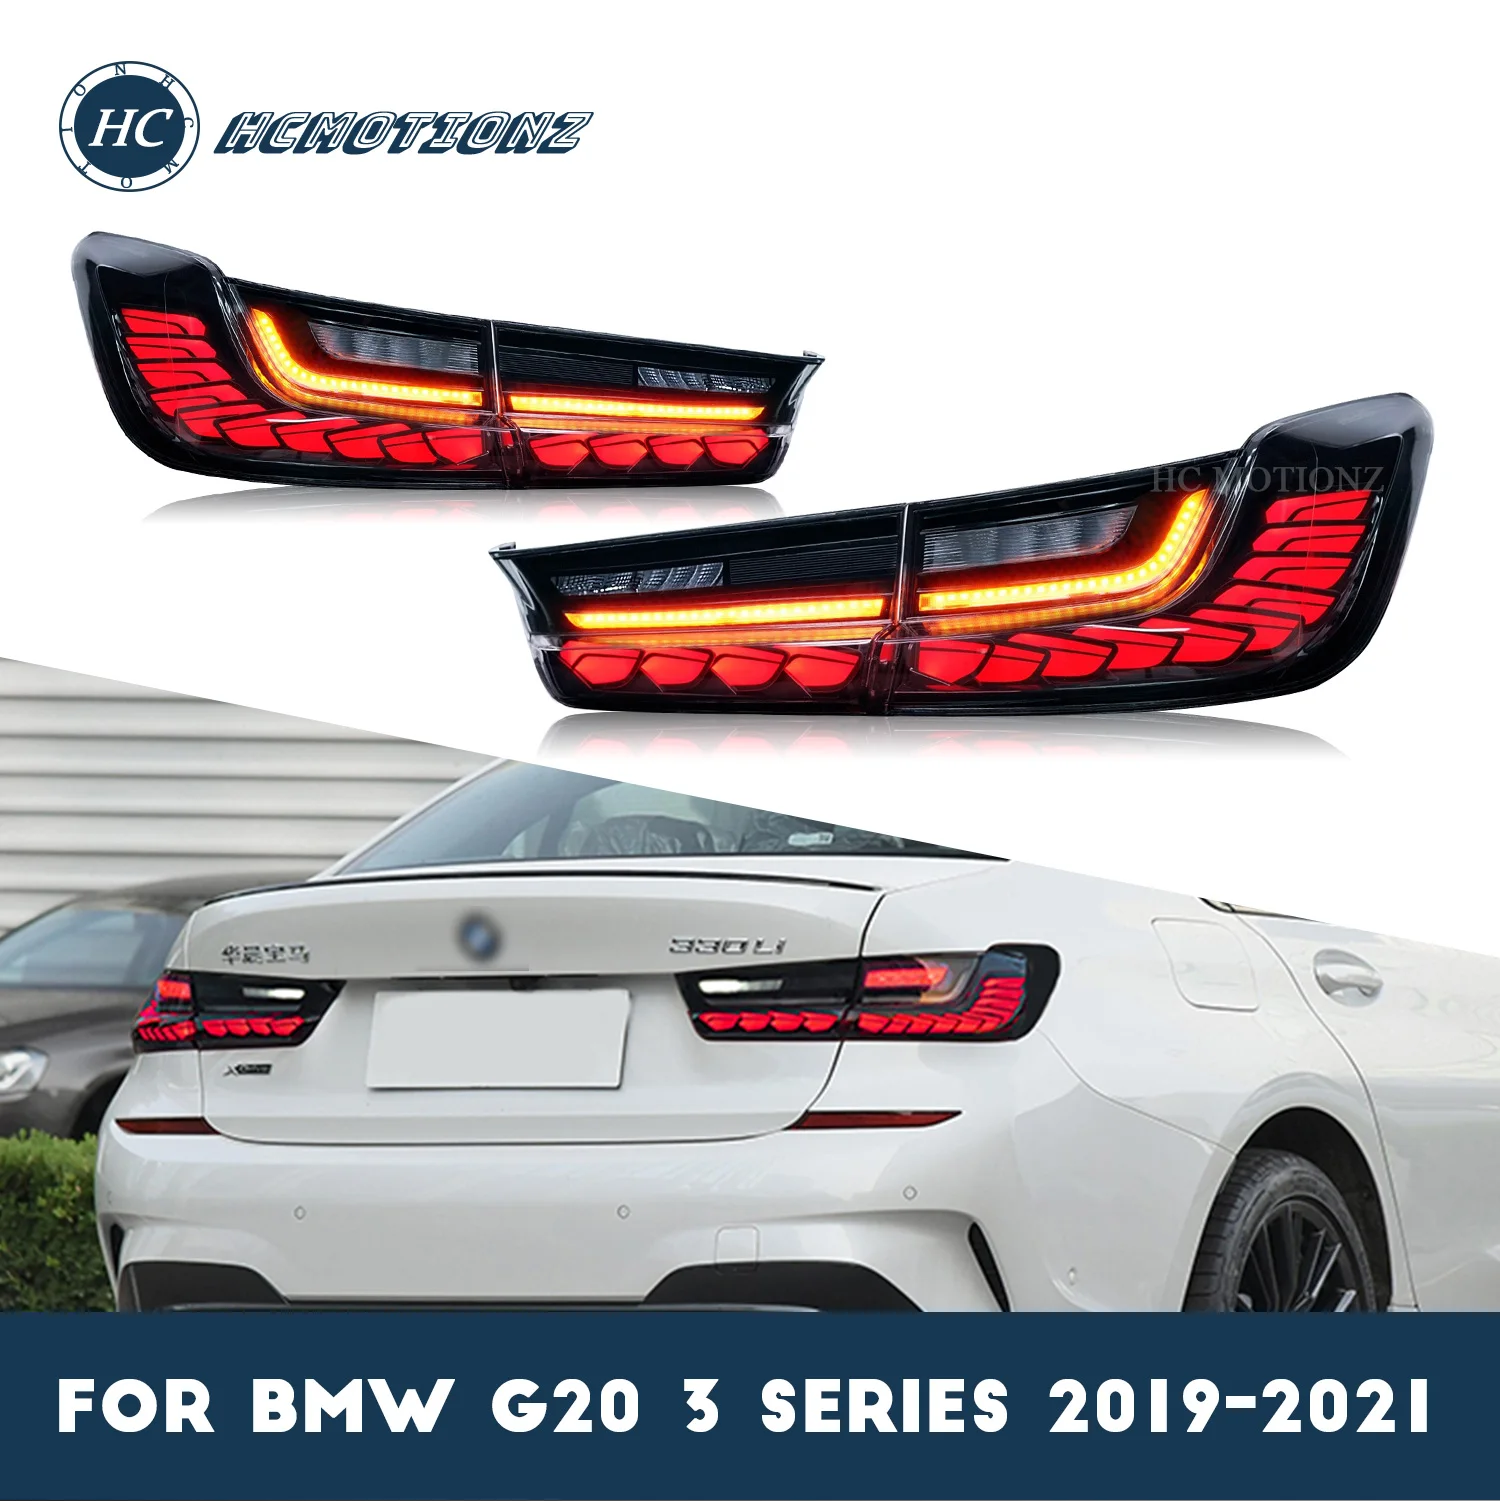 

HCMOTIONZ Car LED Tail Lights for BMW 3 Series 2019-2021 DRL Rear Lamps Assembly Start UP Animation G20 G80 M3